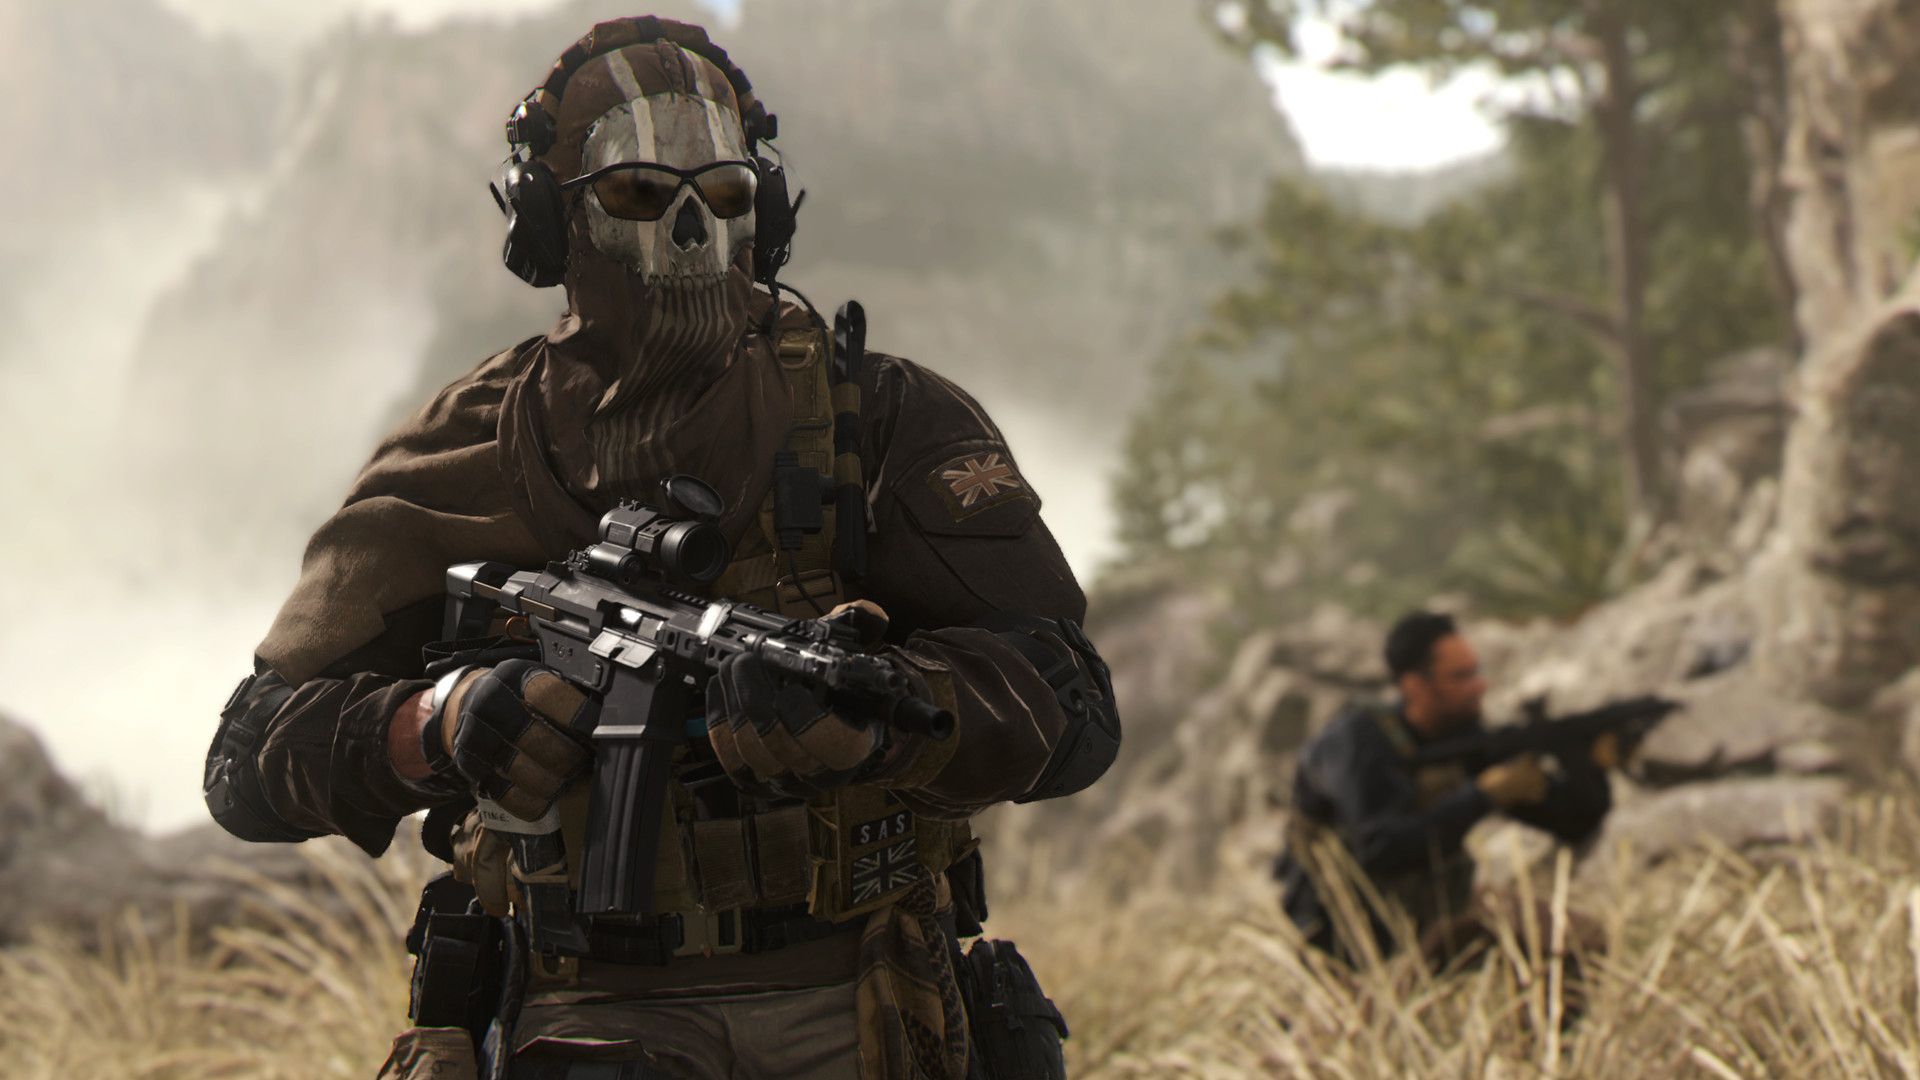 In this article, we are going to be covering how to fix MW2 crashing on PC, so you can keep playing the newest and highly anticipated Call of Duty title.